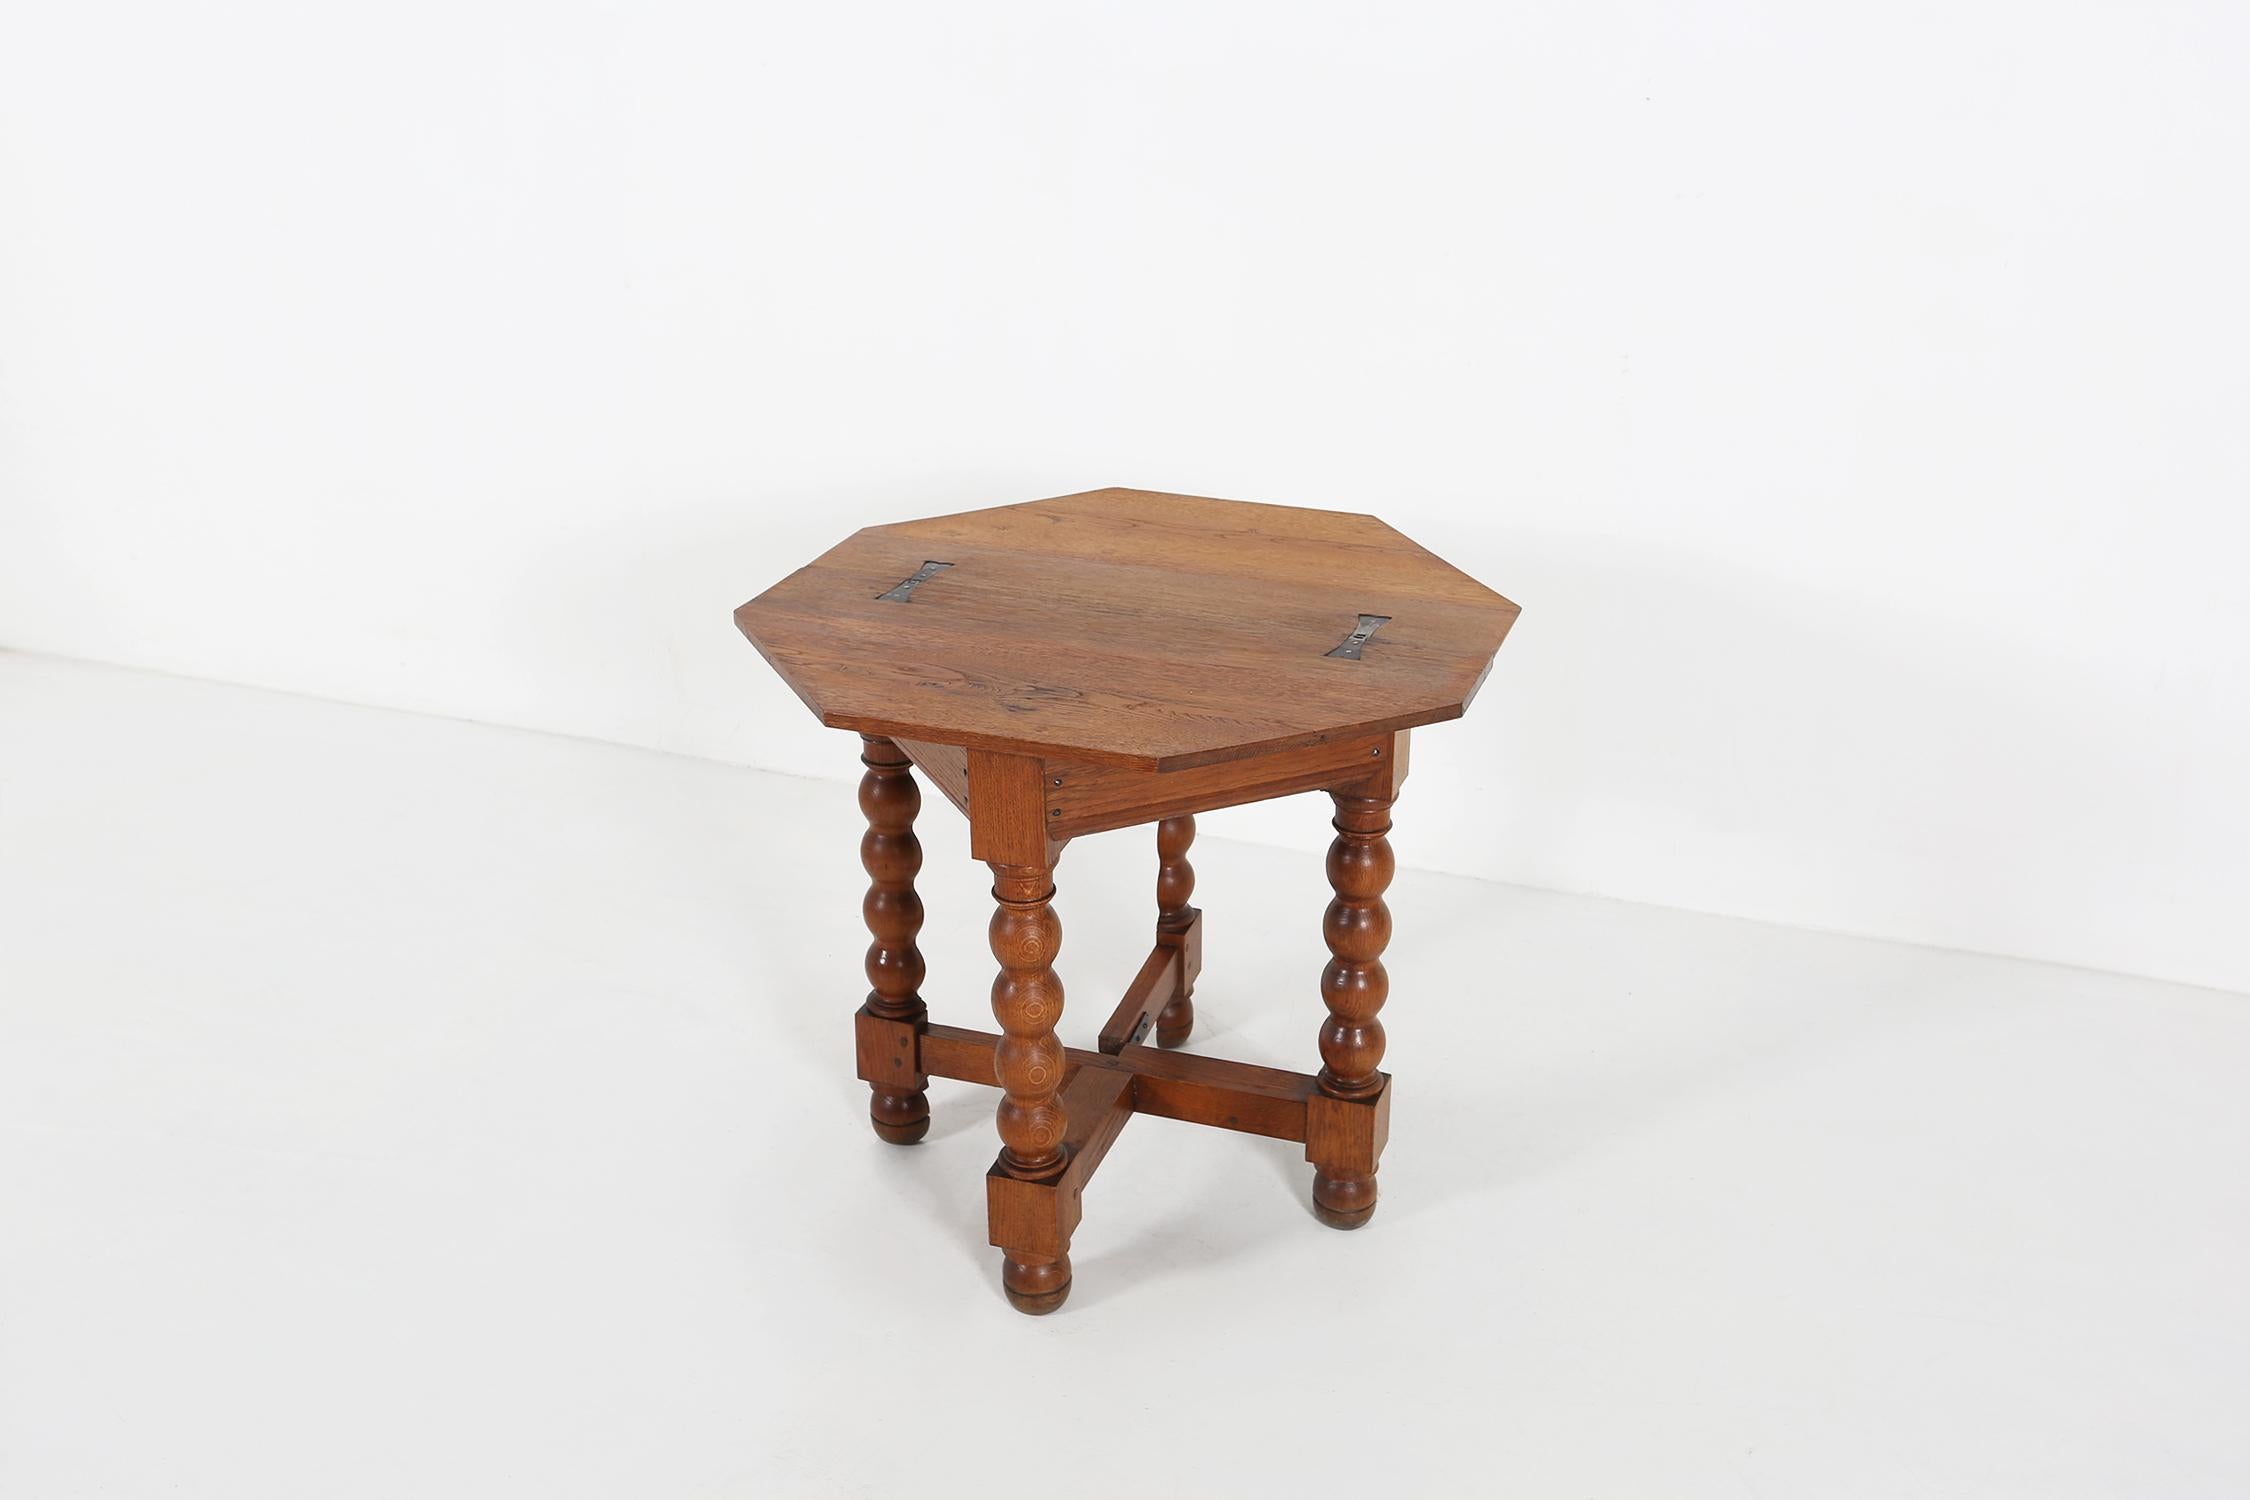 French antique folding side table made in solid oak wood.
Has some nice details in the recessed black hinges and the twisted legs.